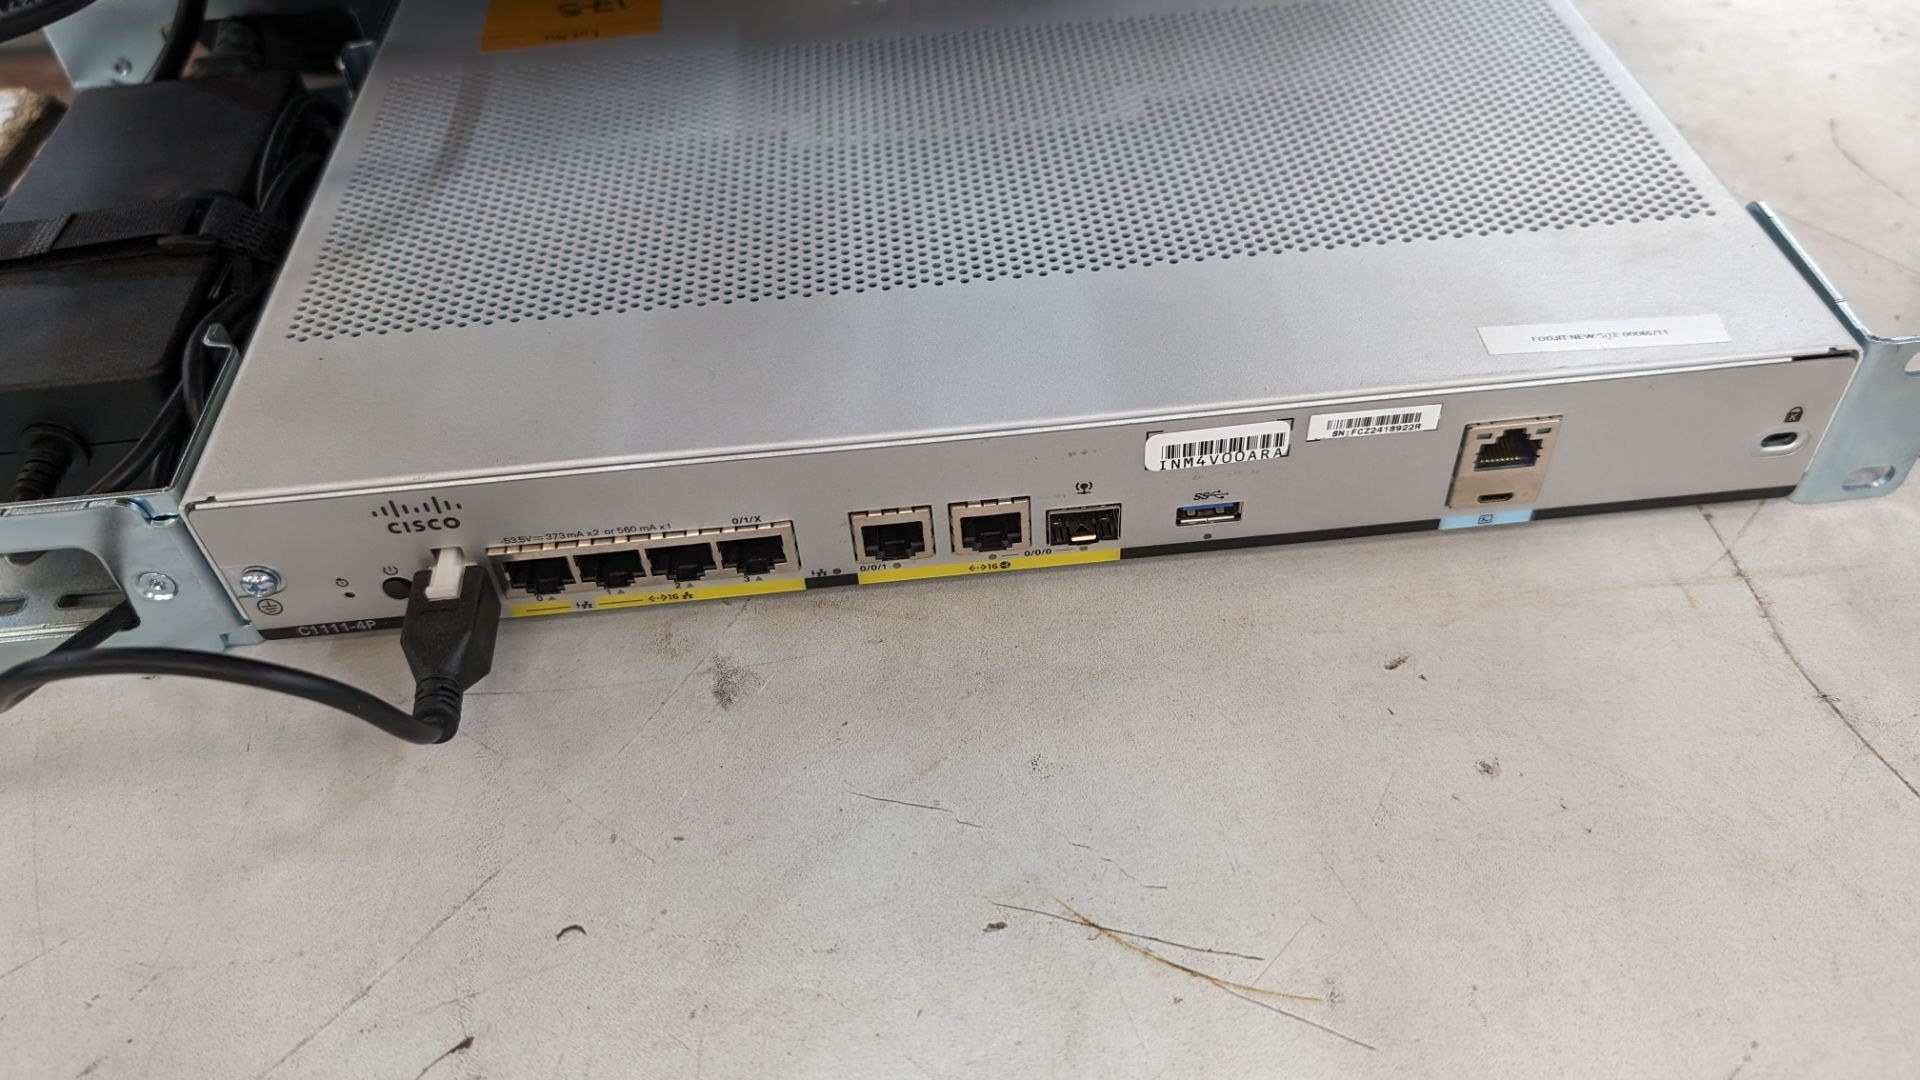 Pair of Cisco rack mountable integrated services routers model C1111-4P including power pack & model - Image 8 of 15